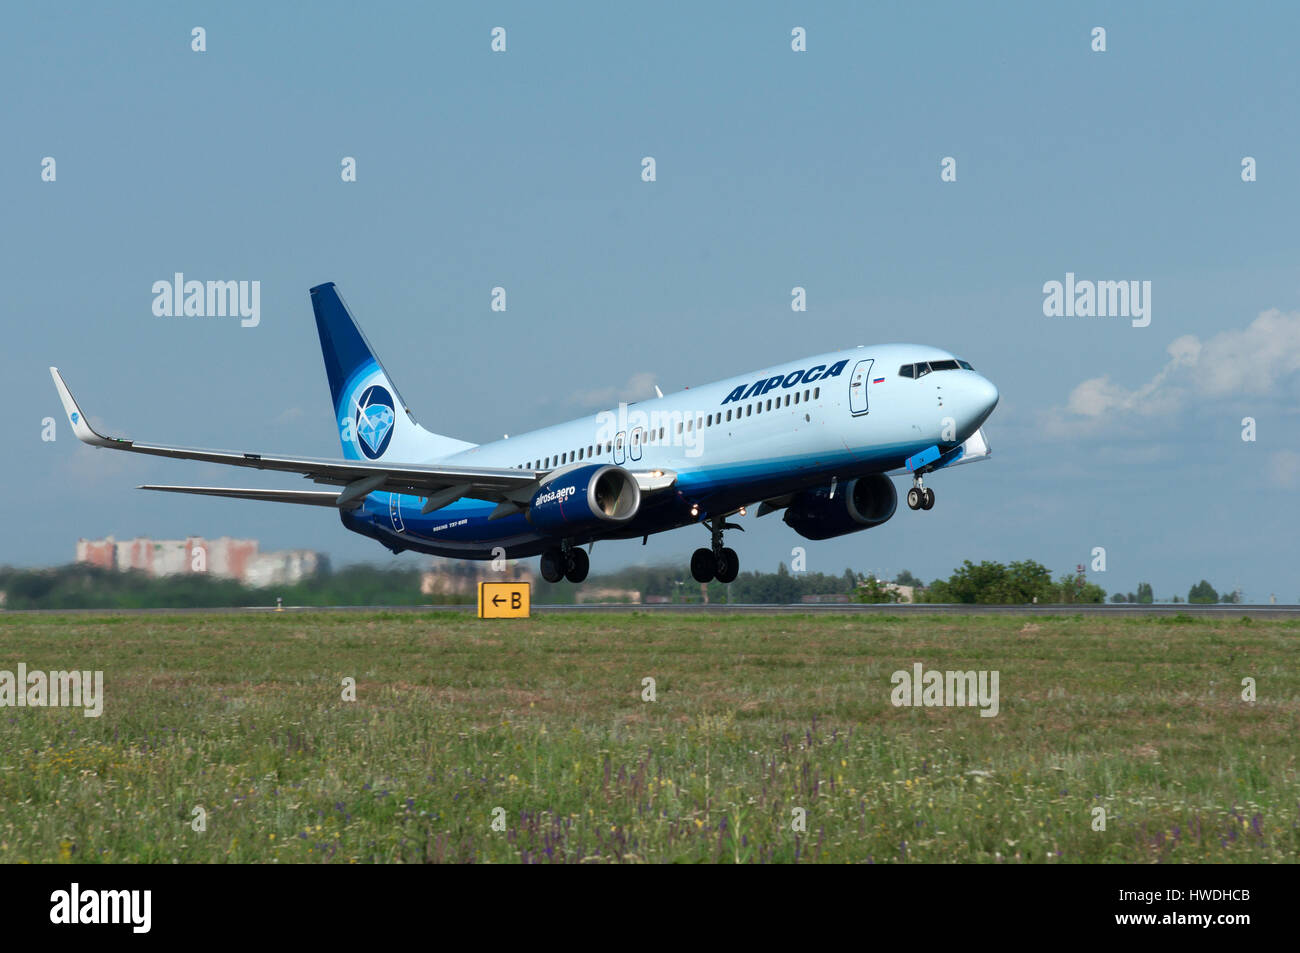 Takeoff of the aircraft Boeing-737, Rostov-on-Don, Russia, 15th of June 2015. Official spotting. Stock Photo